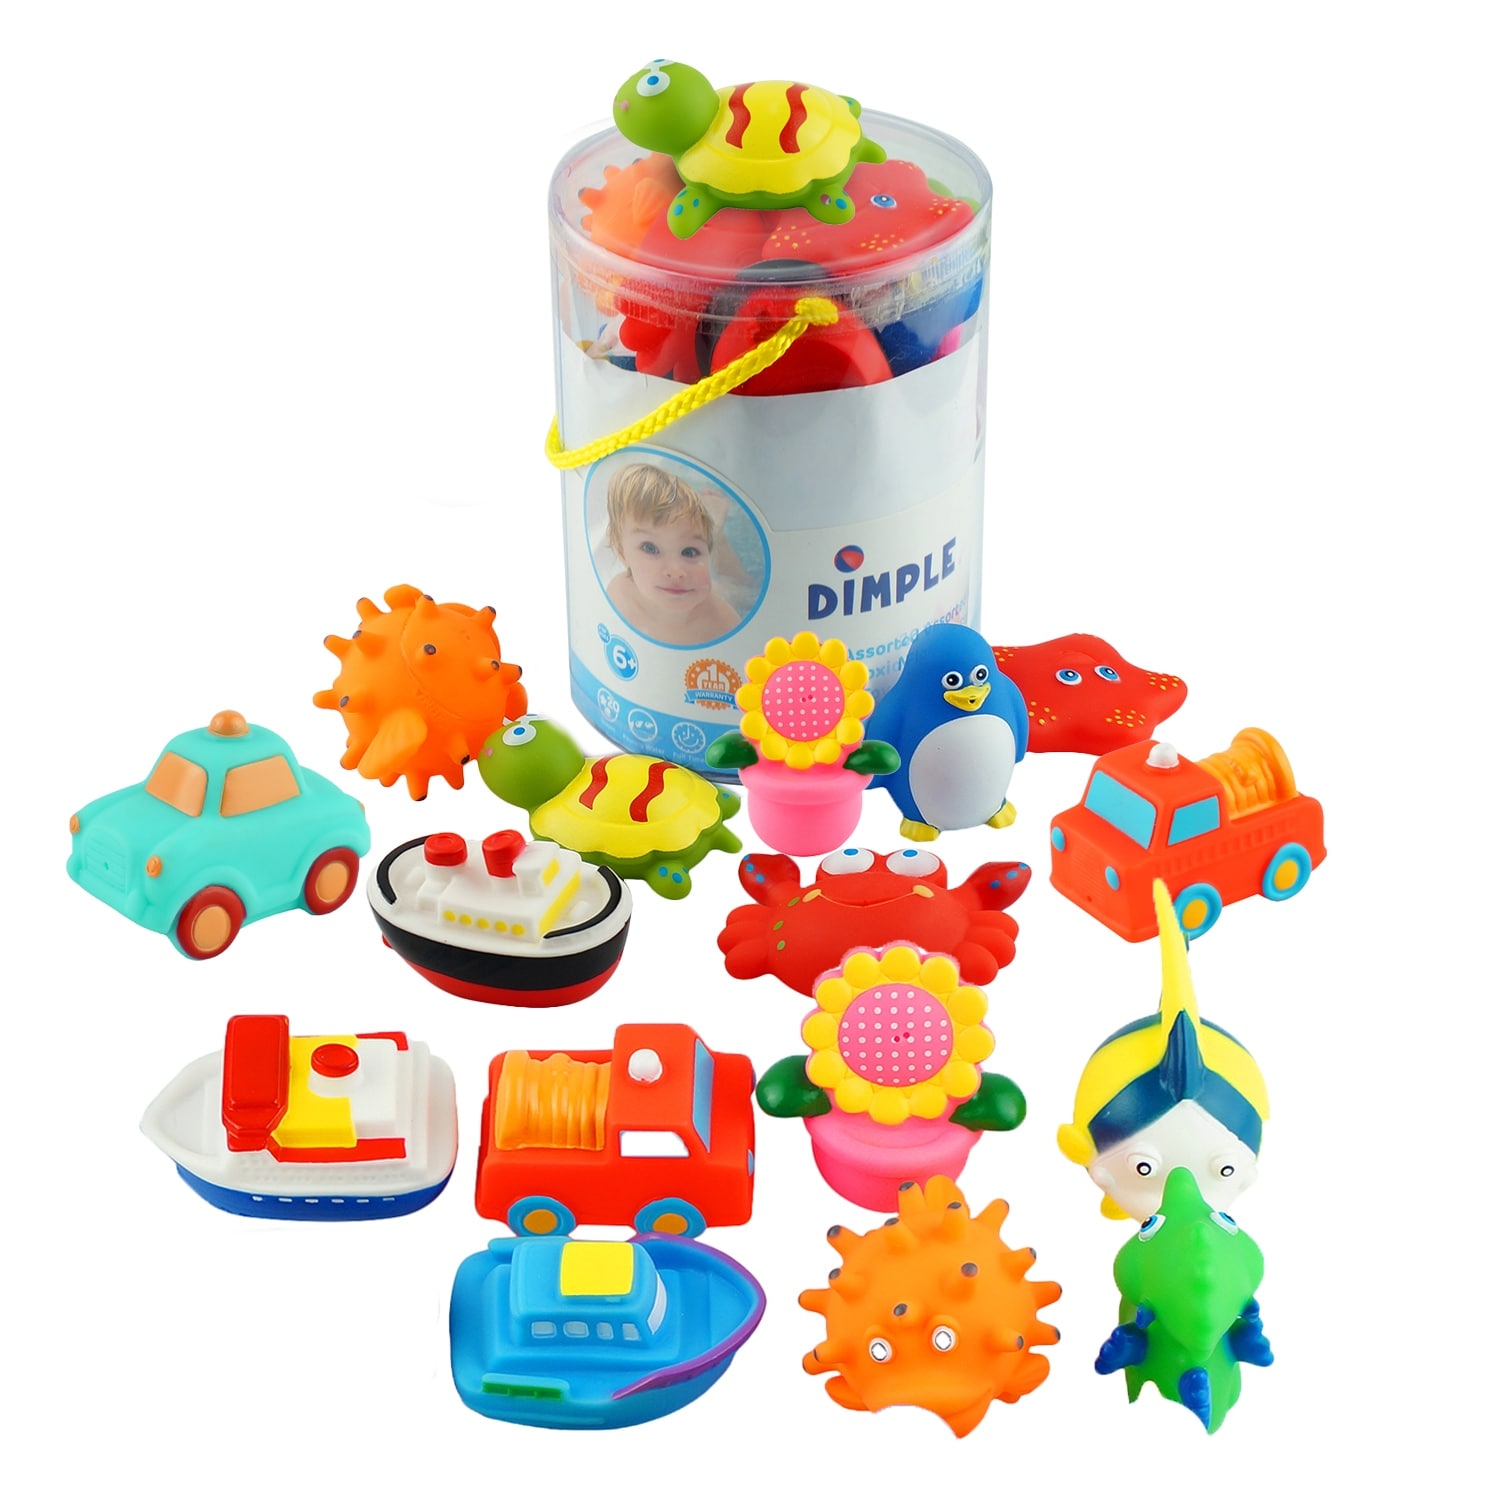 Dimple Set of 20 Floating Bath Toys with 20 Different Sea Animals, Vehicles and Shapes, Squirter Toys for Boys and Girls